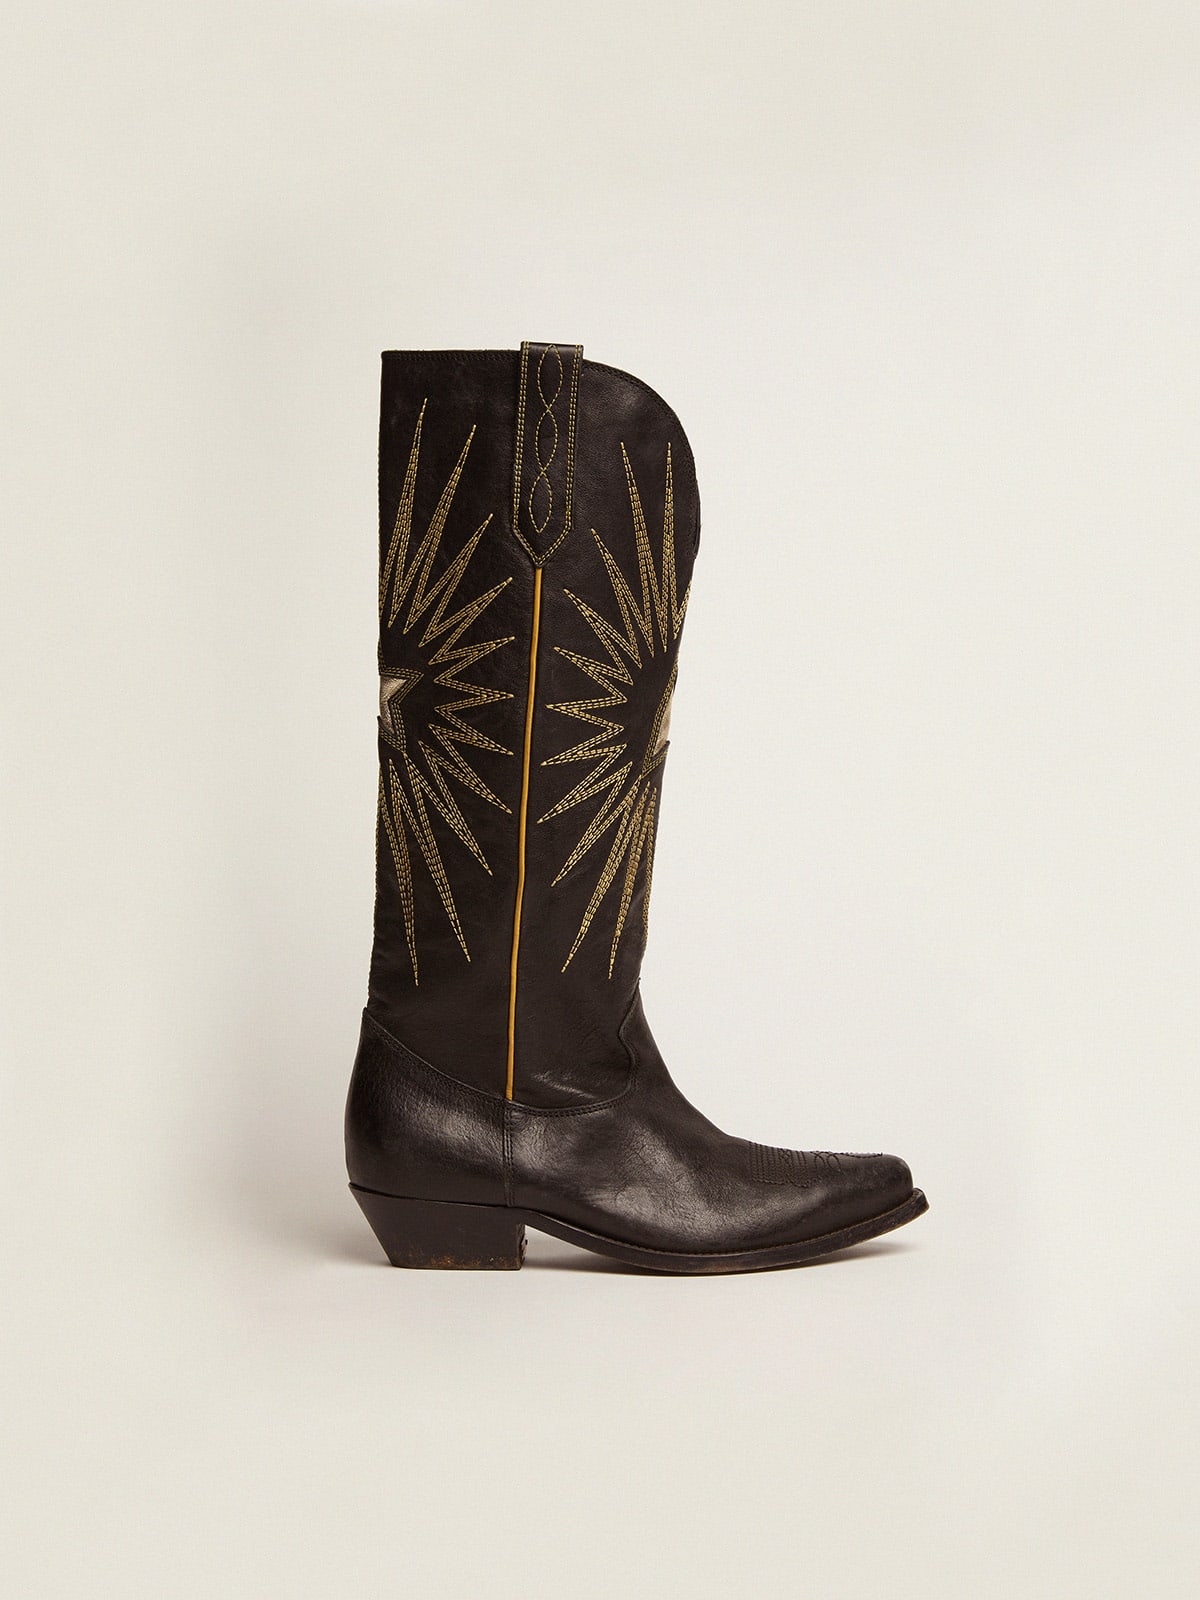 Golden Goose - Women's boots in black leather with platinum star inlay in 